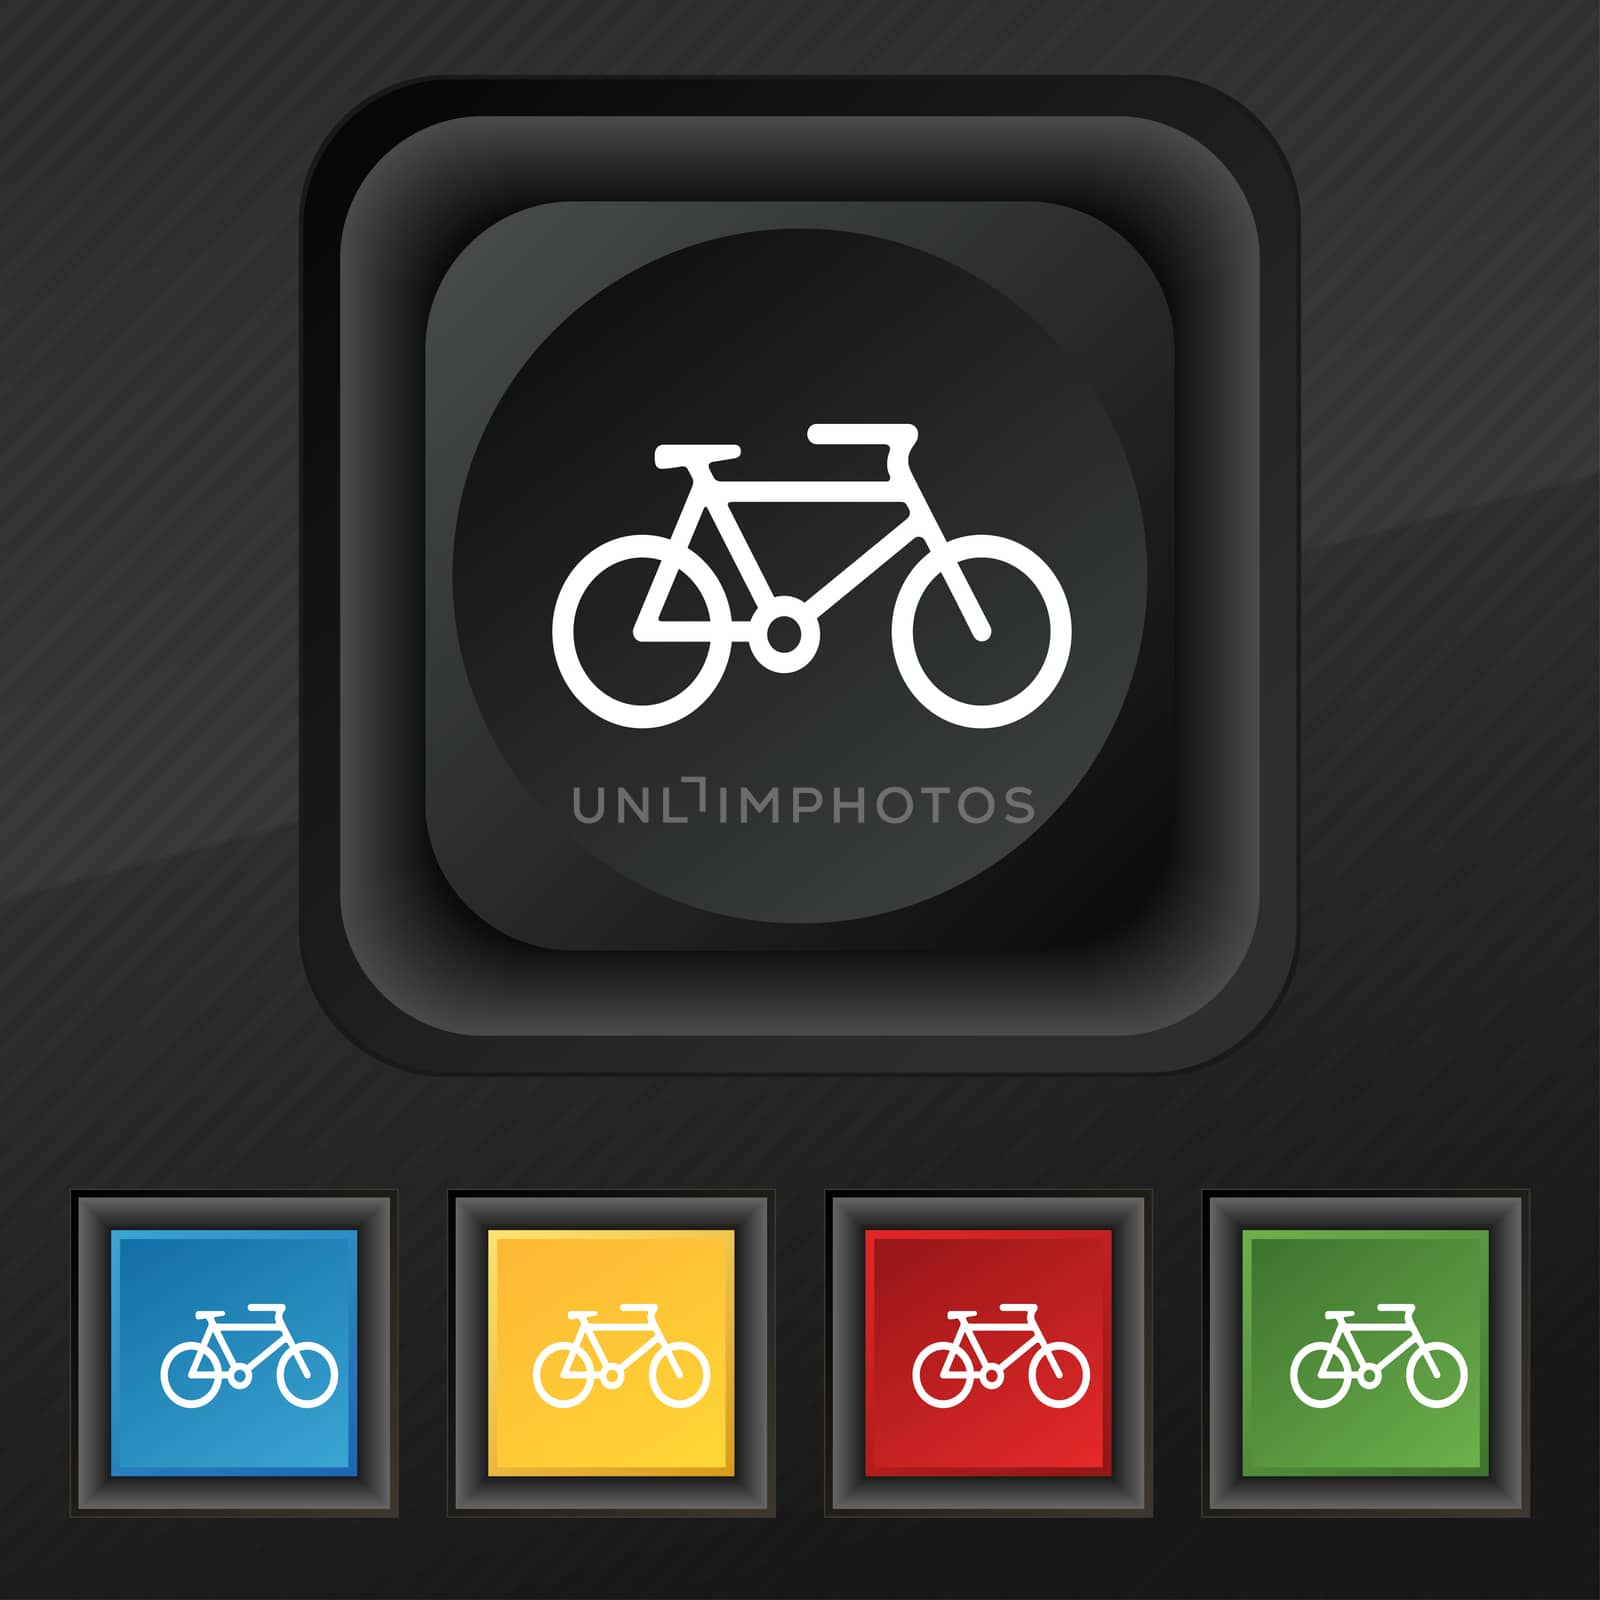 bike icon symbol. Set of five colorful, stylish buttons on black texture for your design. illustration